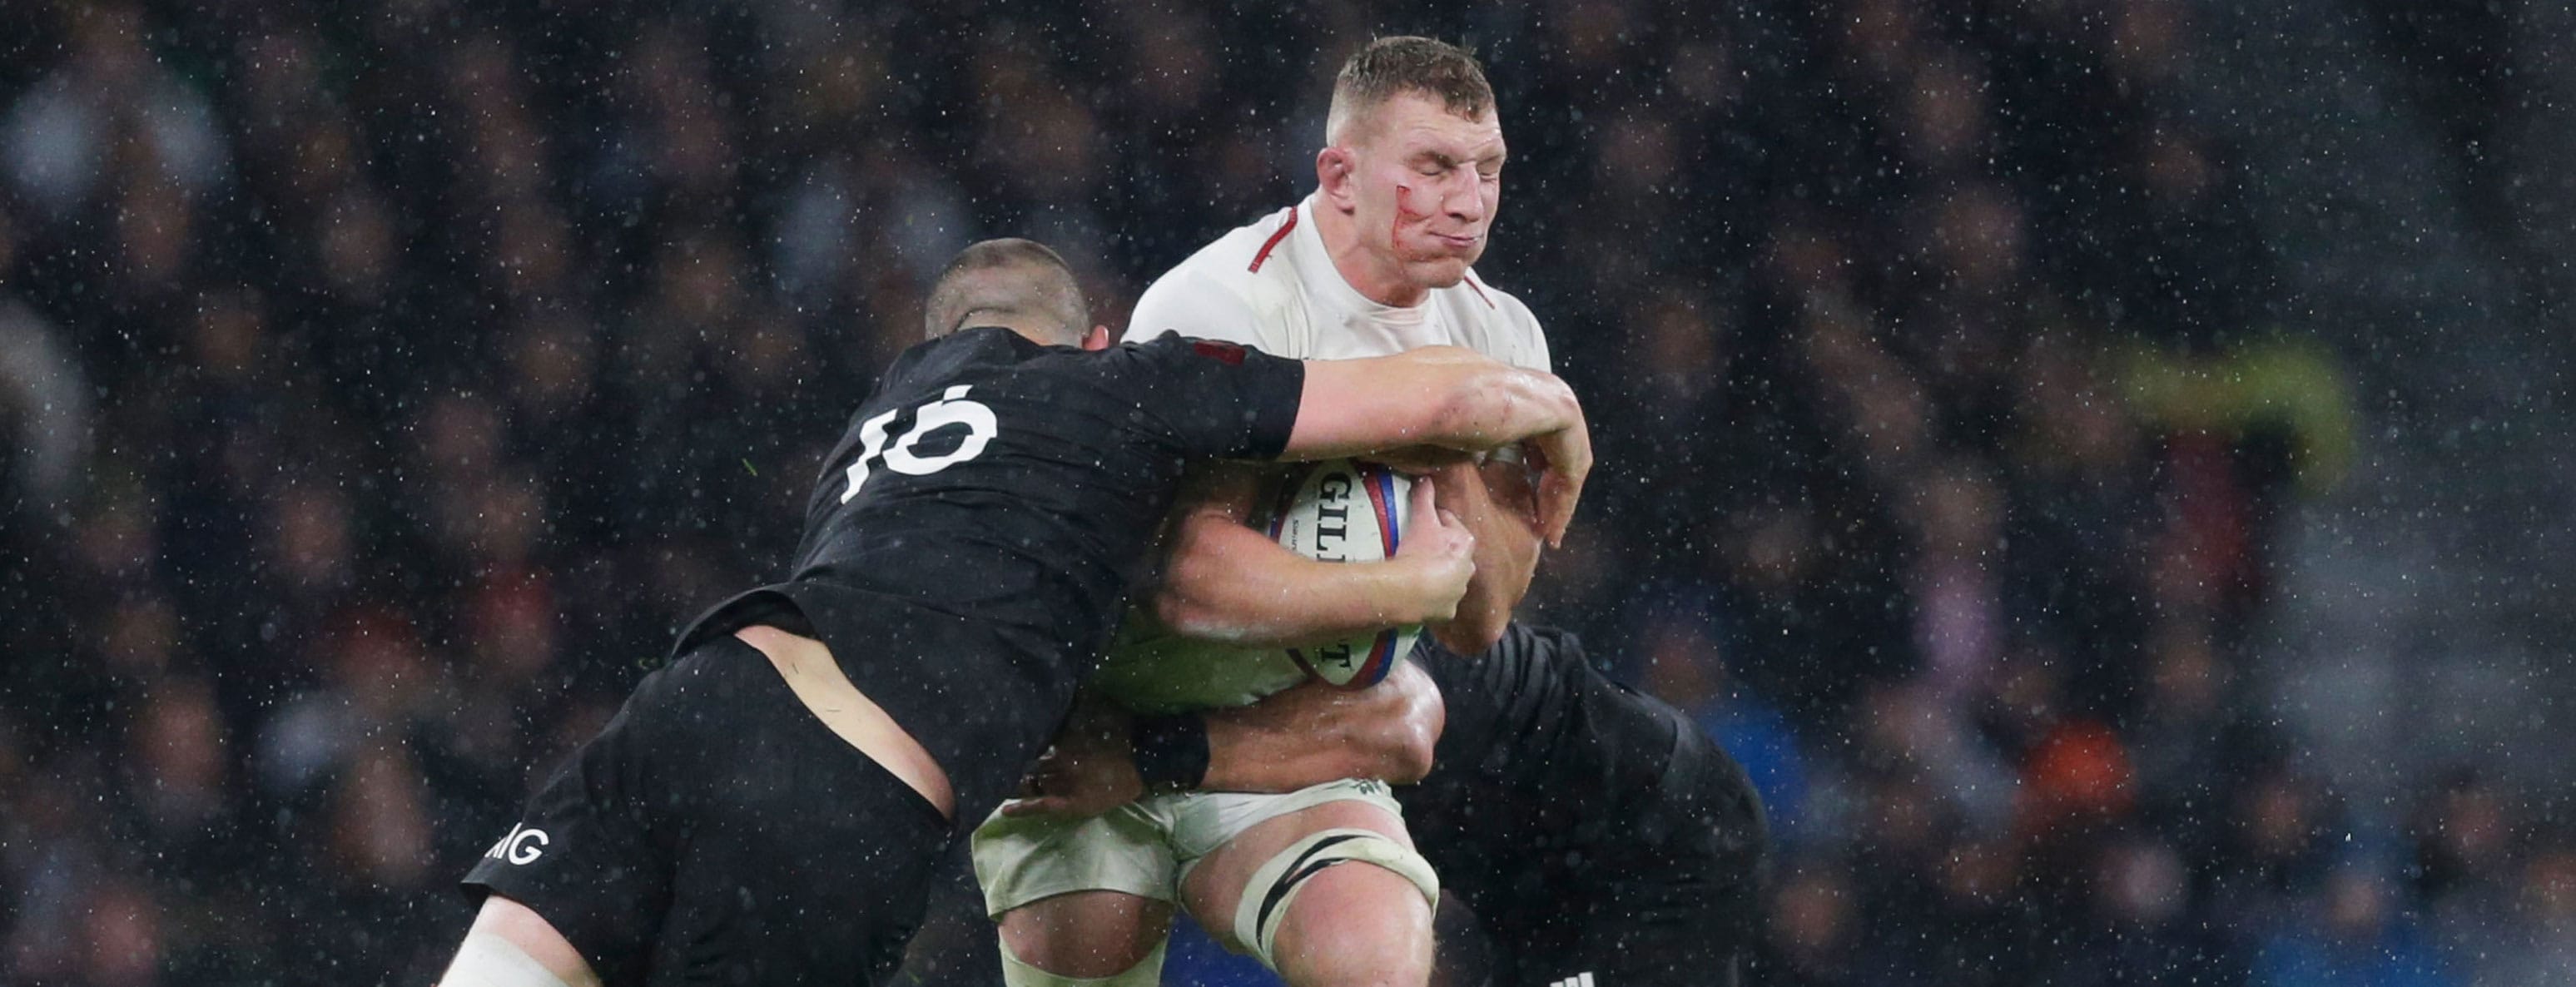 Action from England vs New Zealand